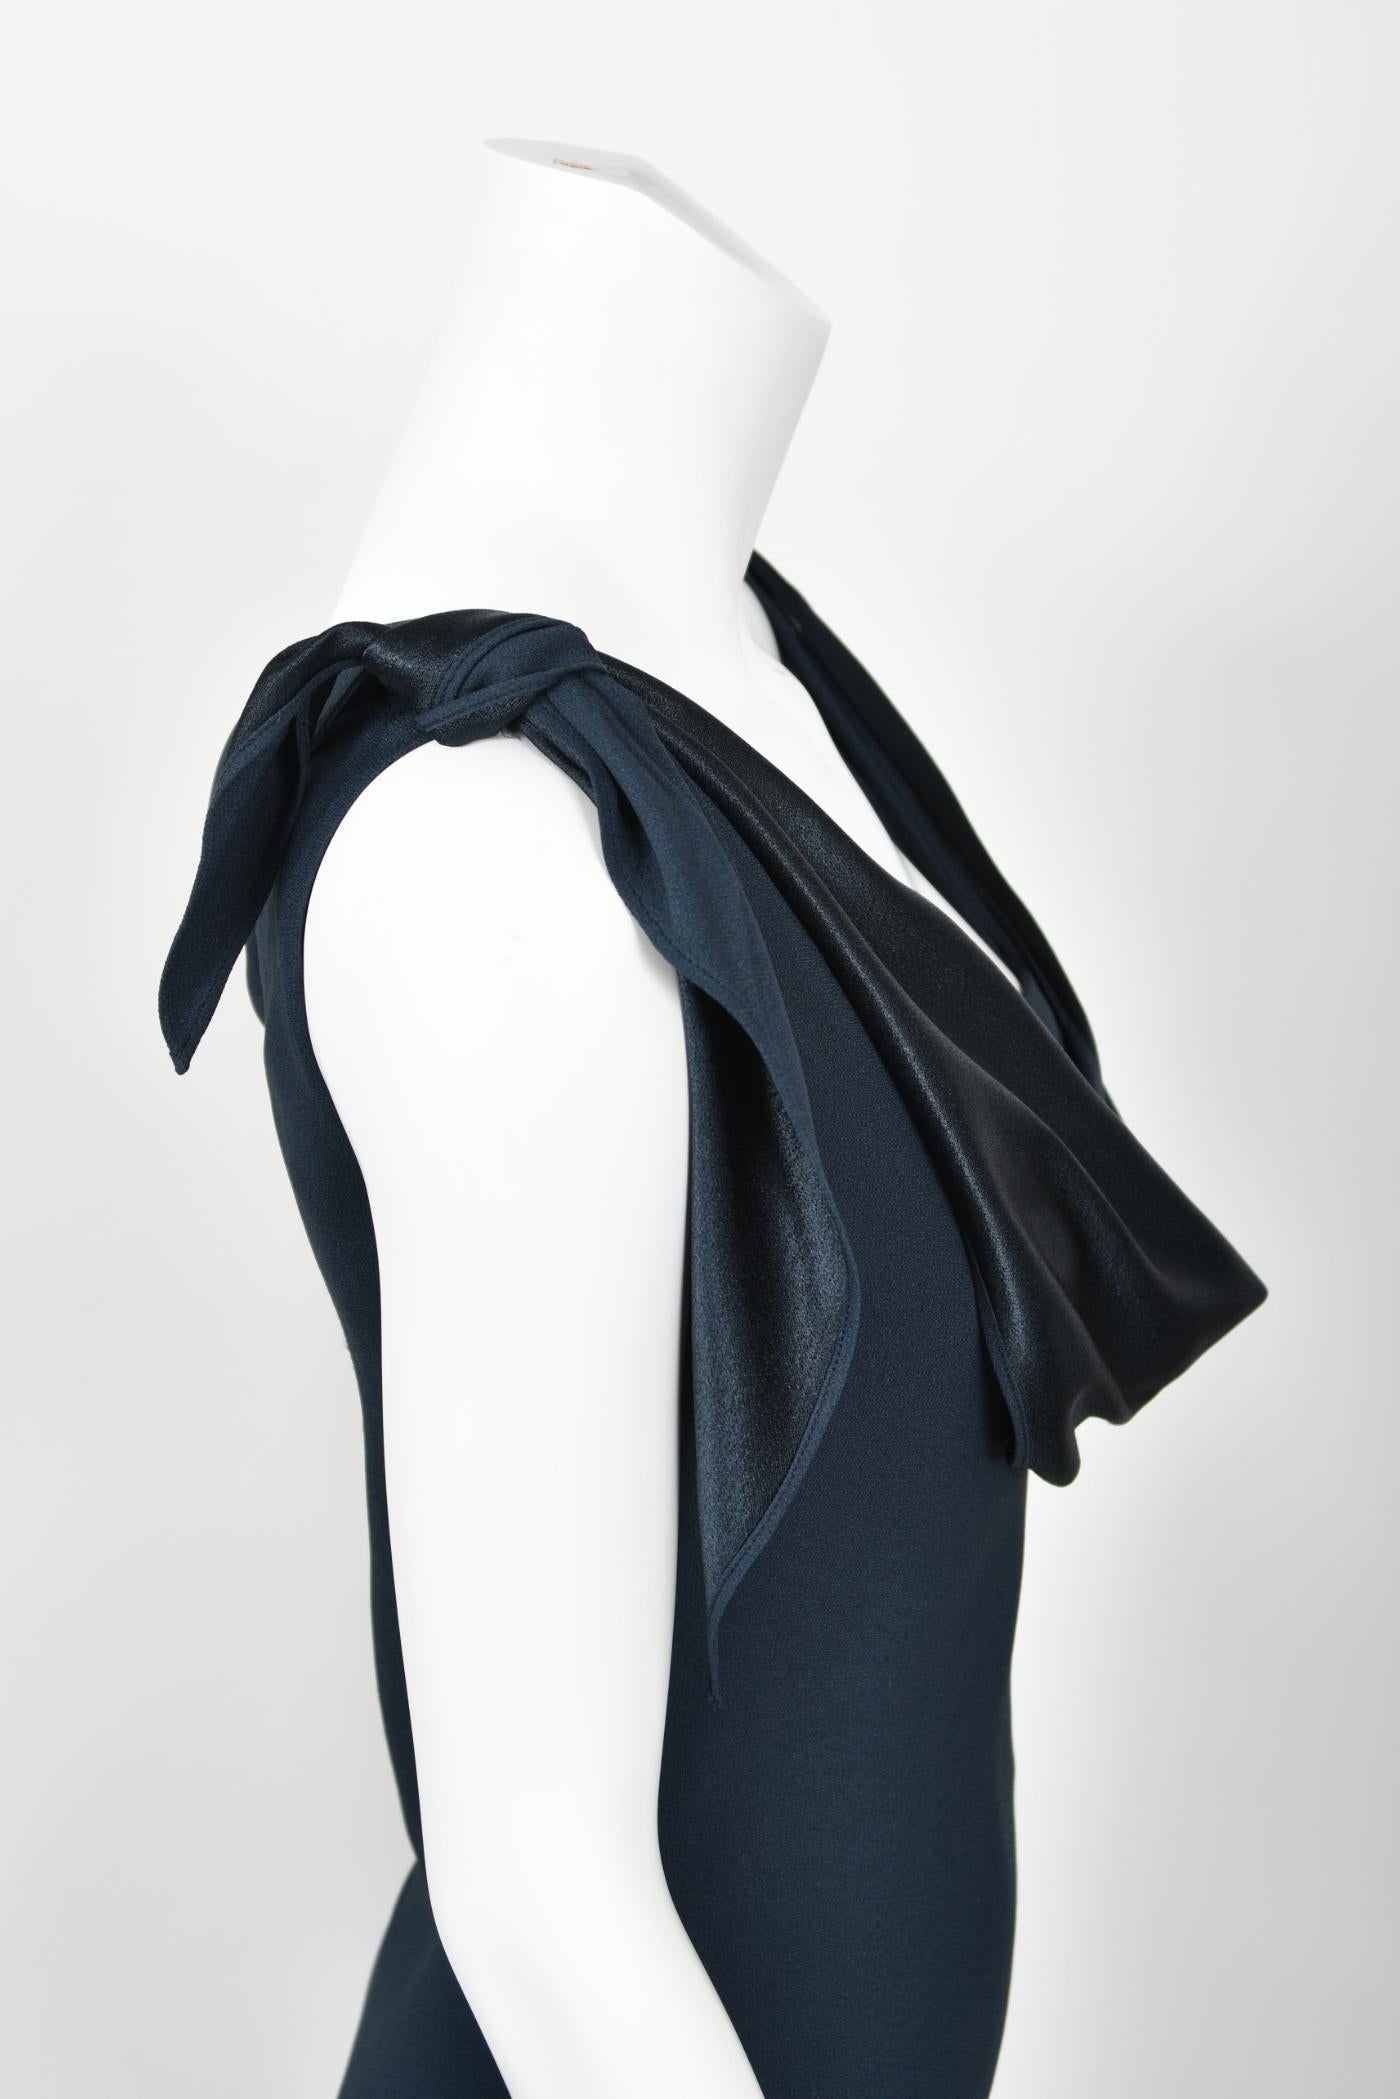 1998 Christian Dior by John Galliano Navy Blue Silk Draped Bias-Cut Evening Gown For Sale 4